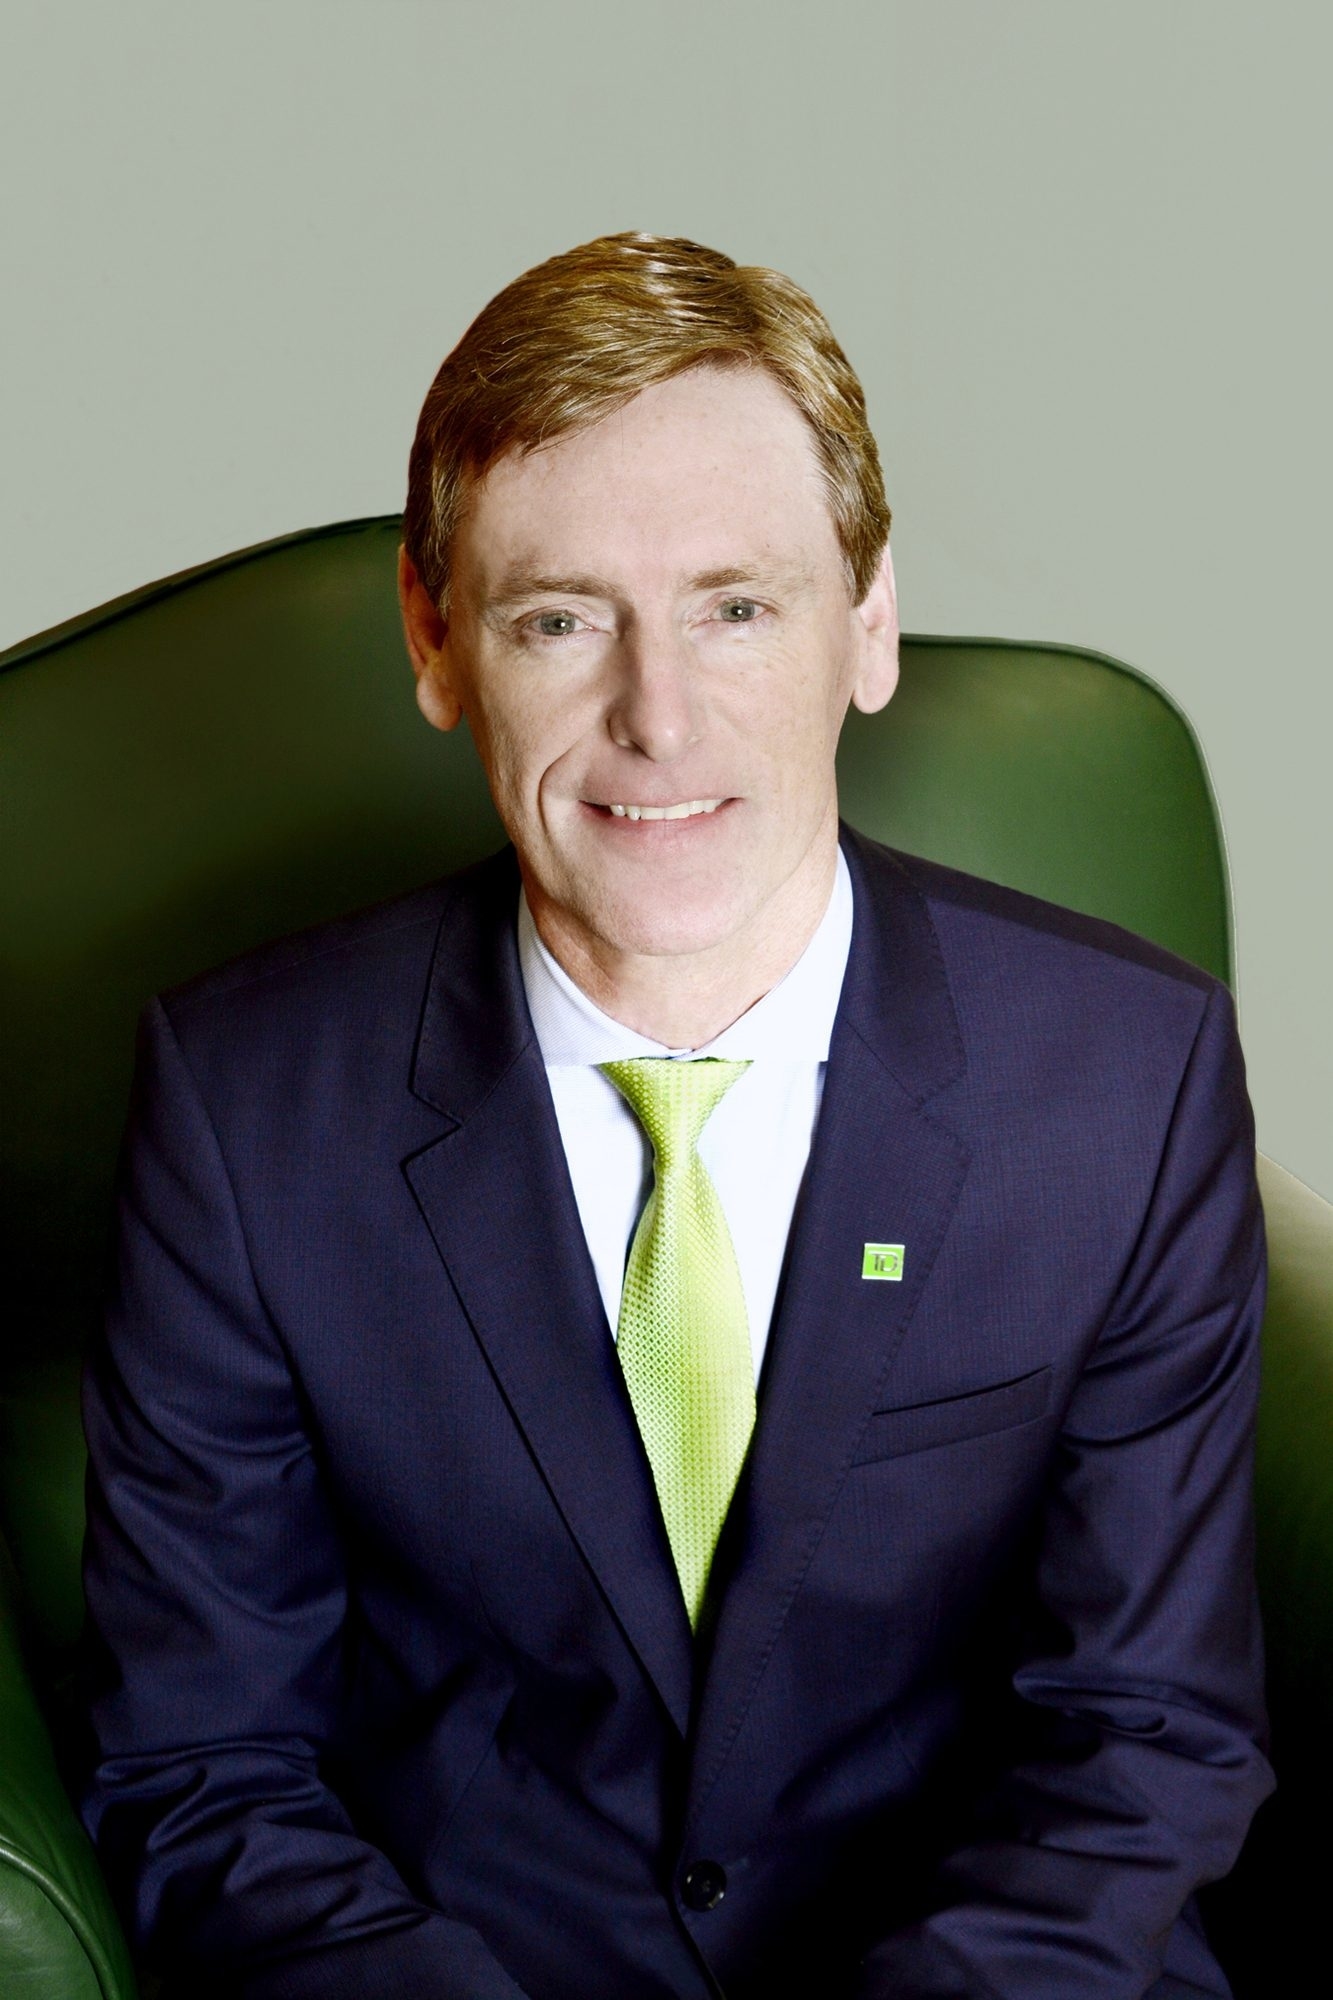 Duncan McEachran - TD Wealth Private Investment Advice - Conseillers en placements